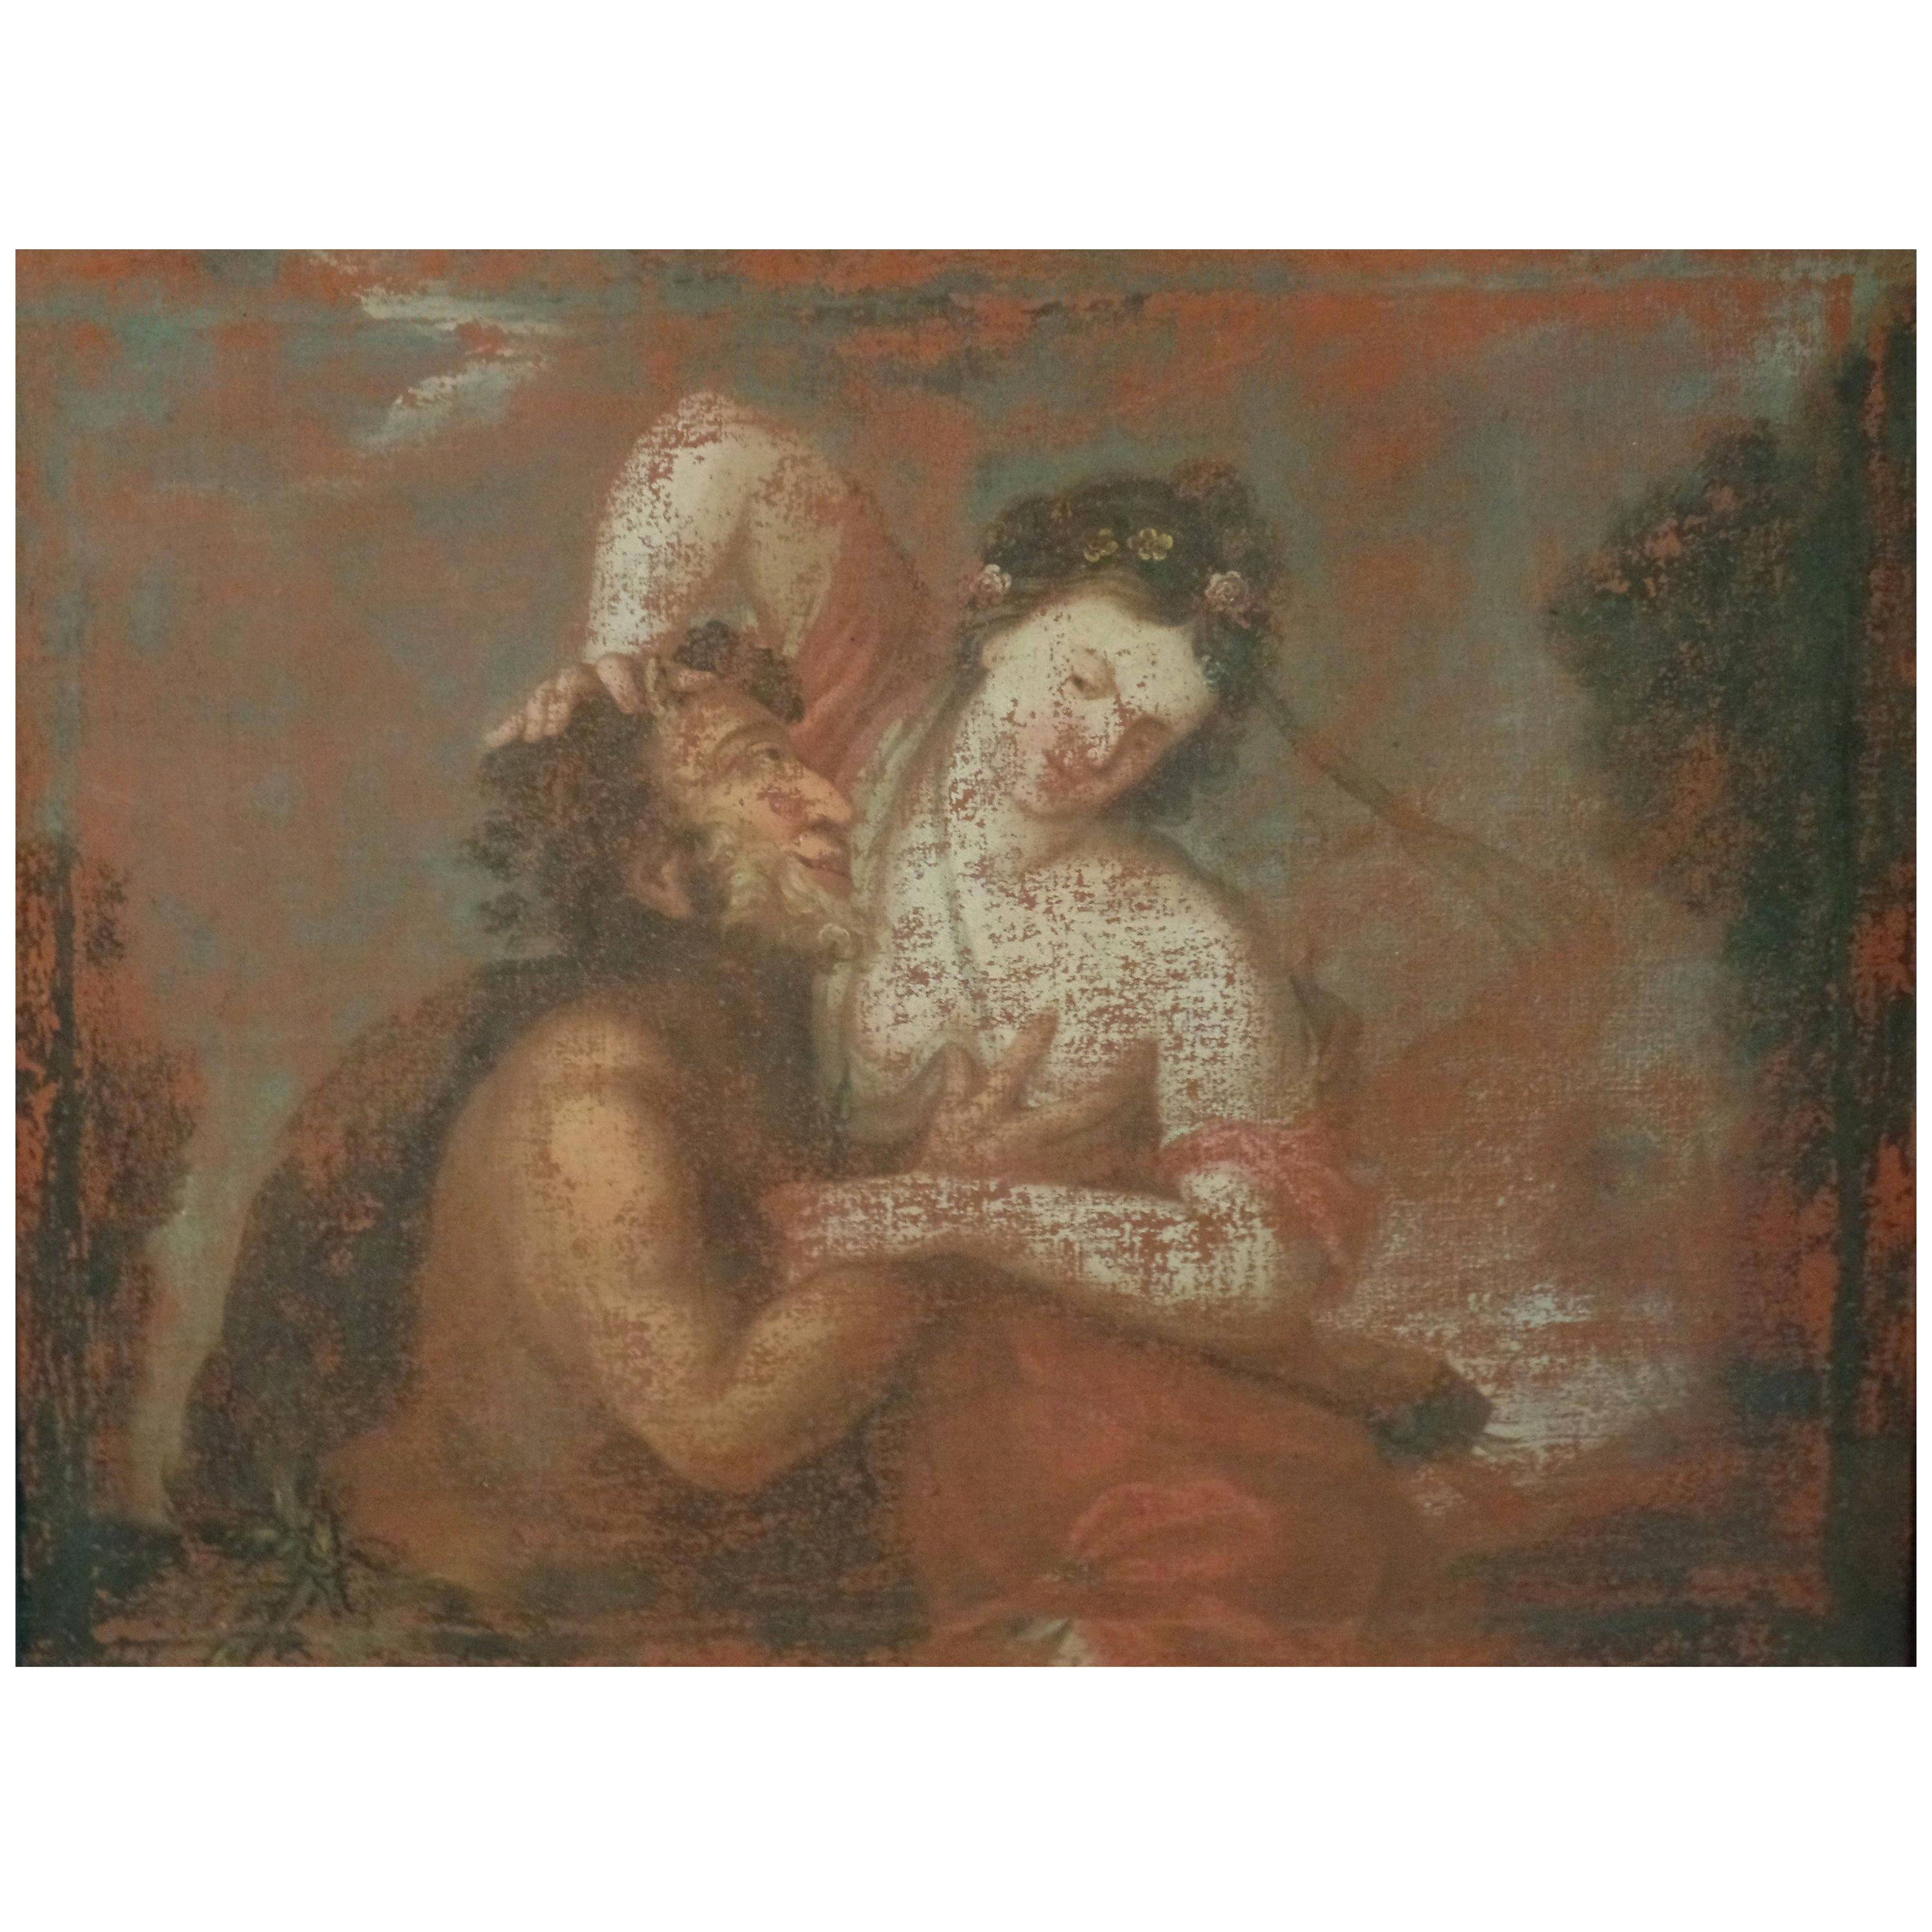 17th Century European Painting, Struggle between Satyr, Pan and a Woman